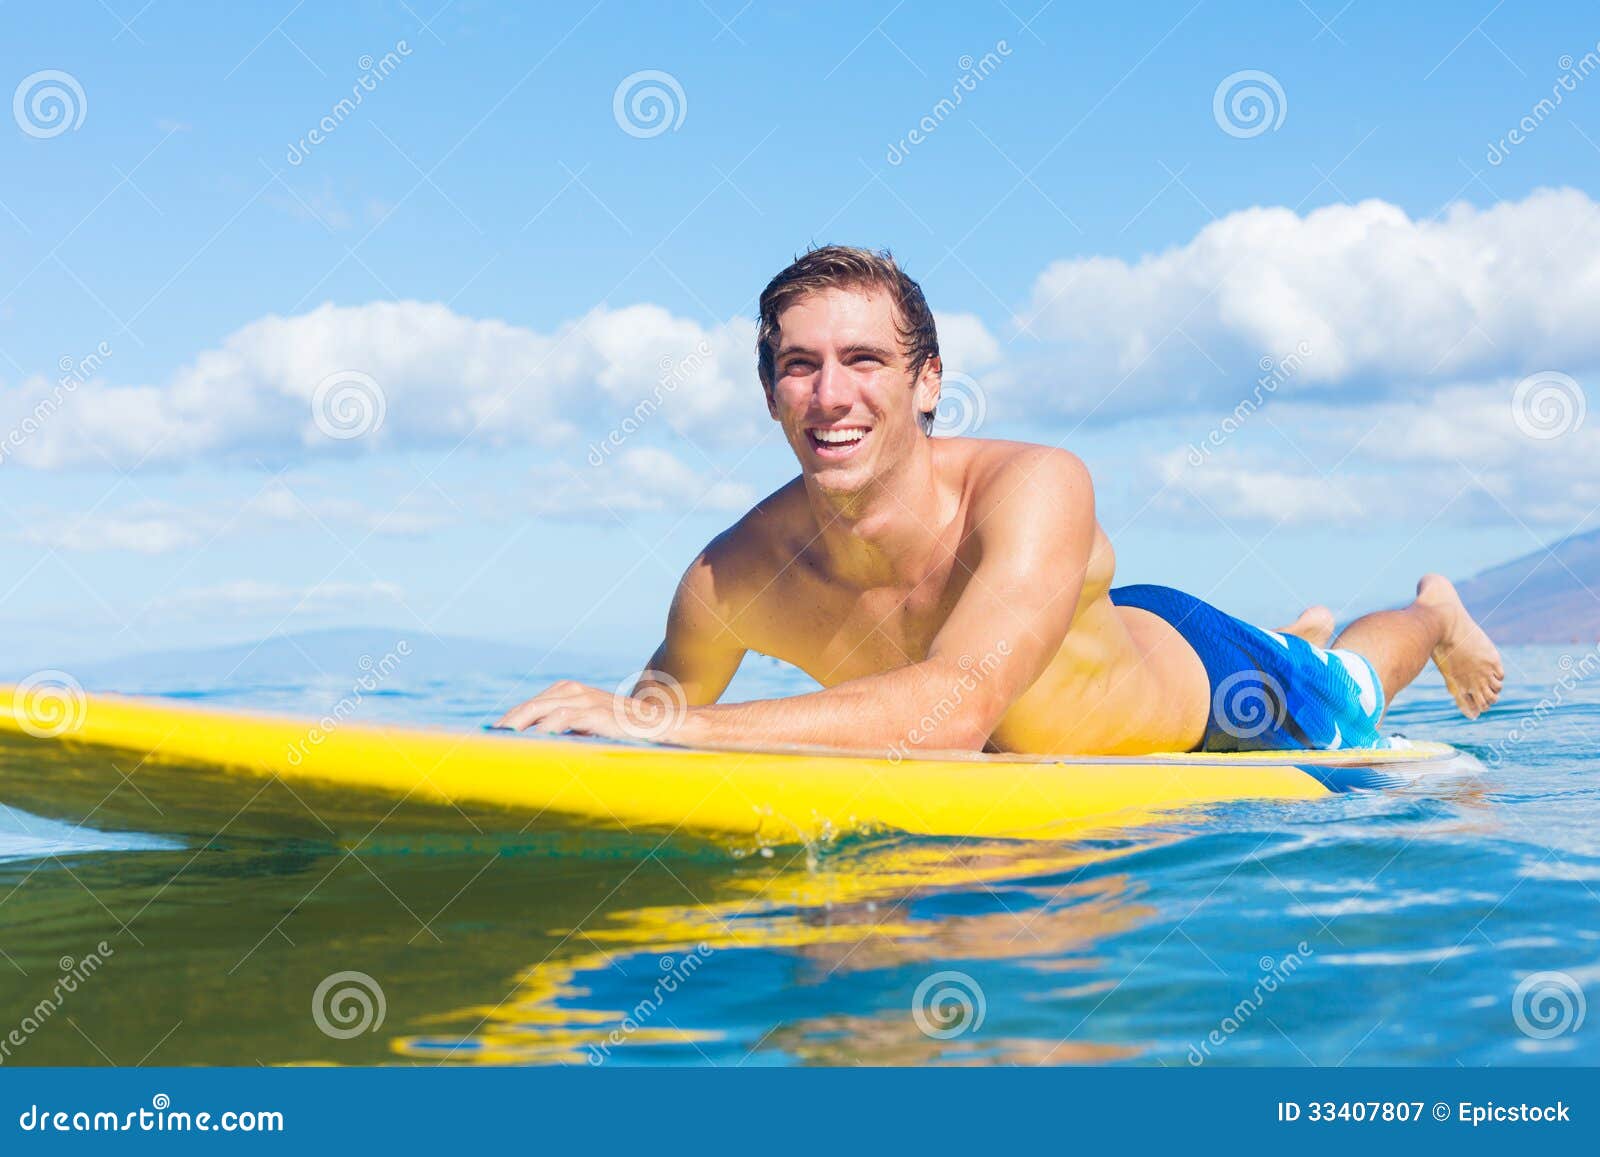 Man on Stand Up Paddle Board Stock Image - Image of exercise, beach ...